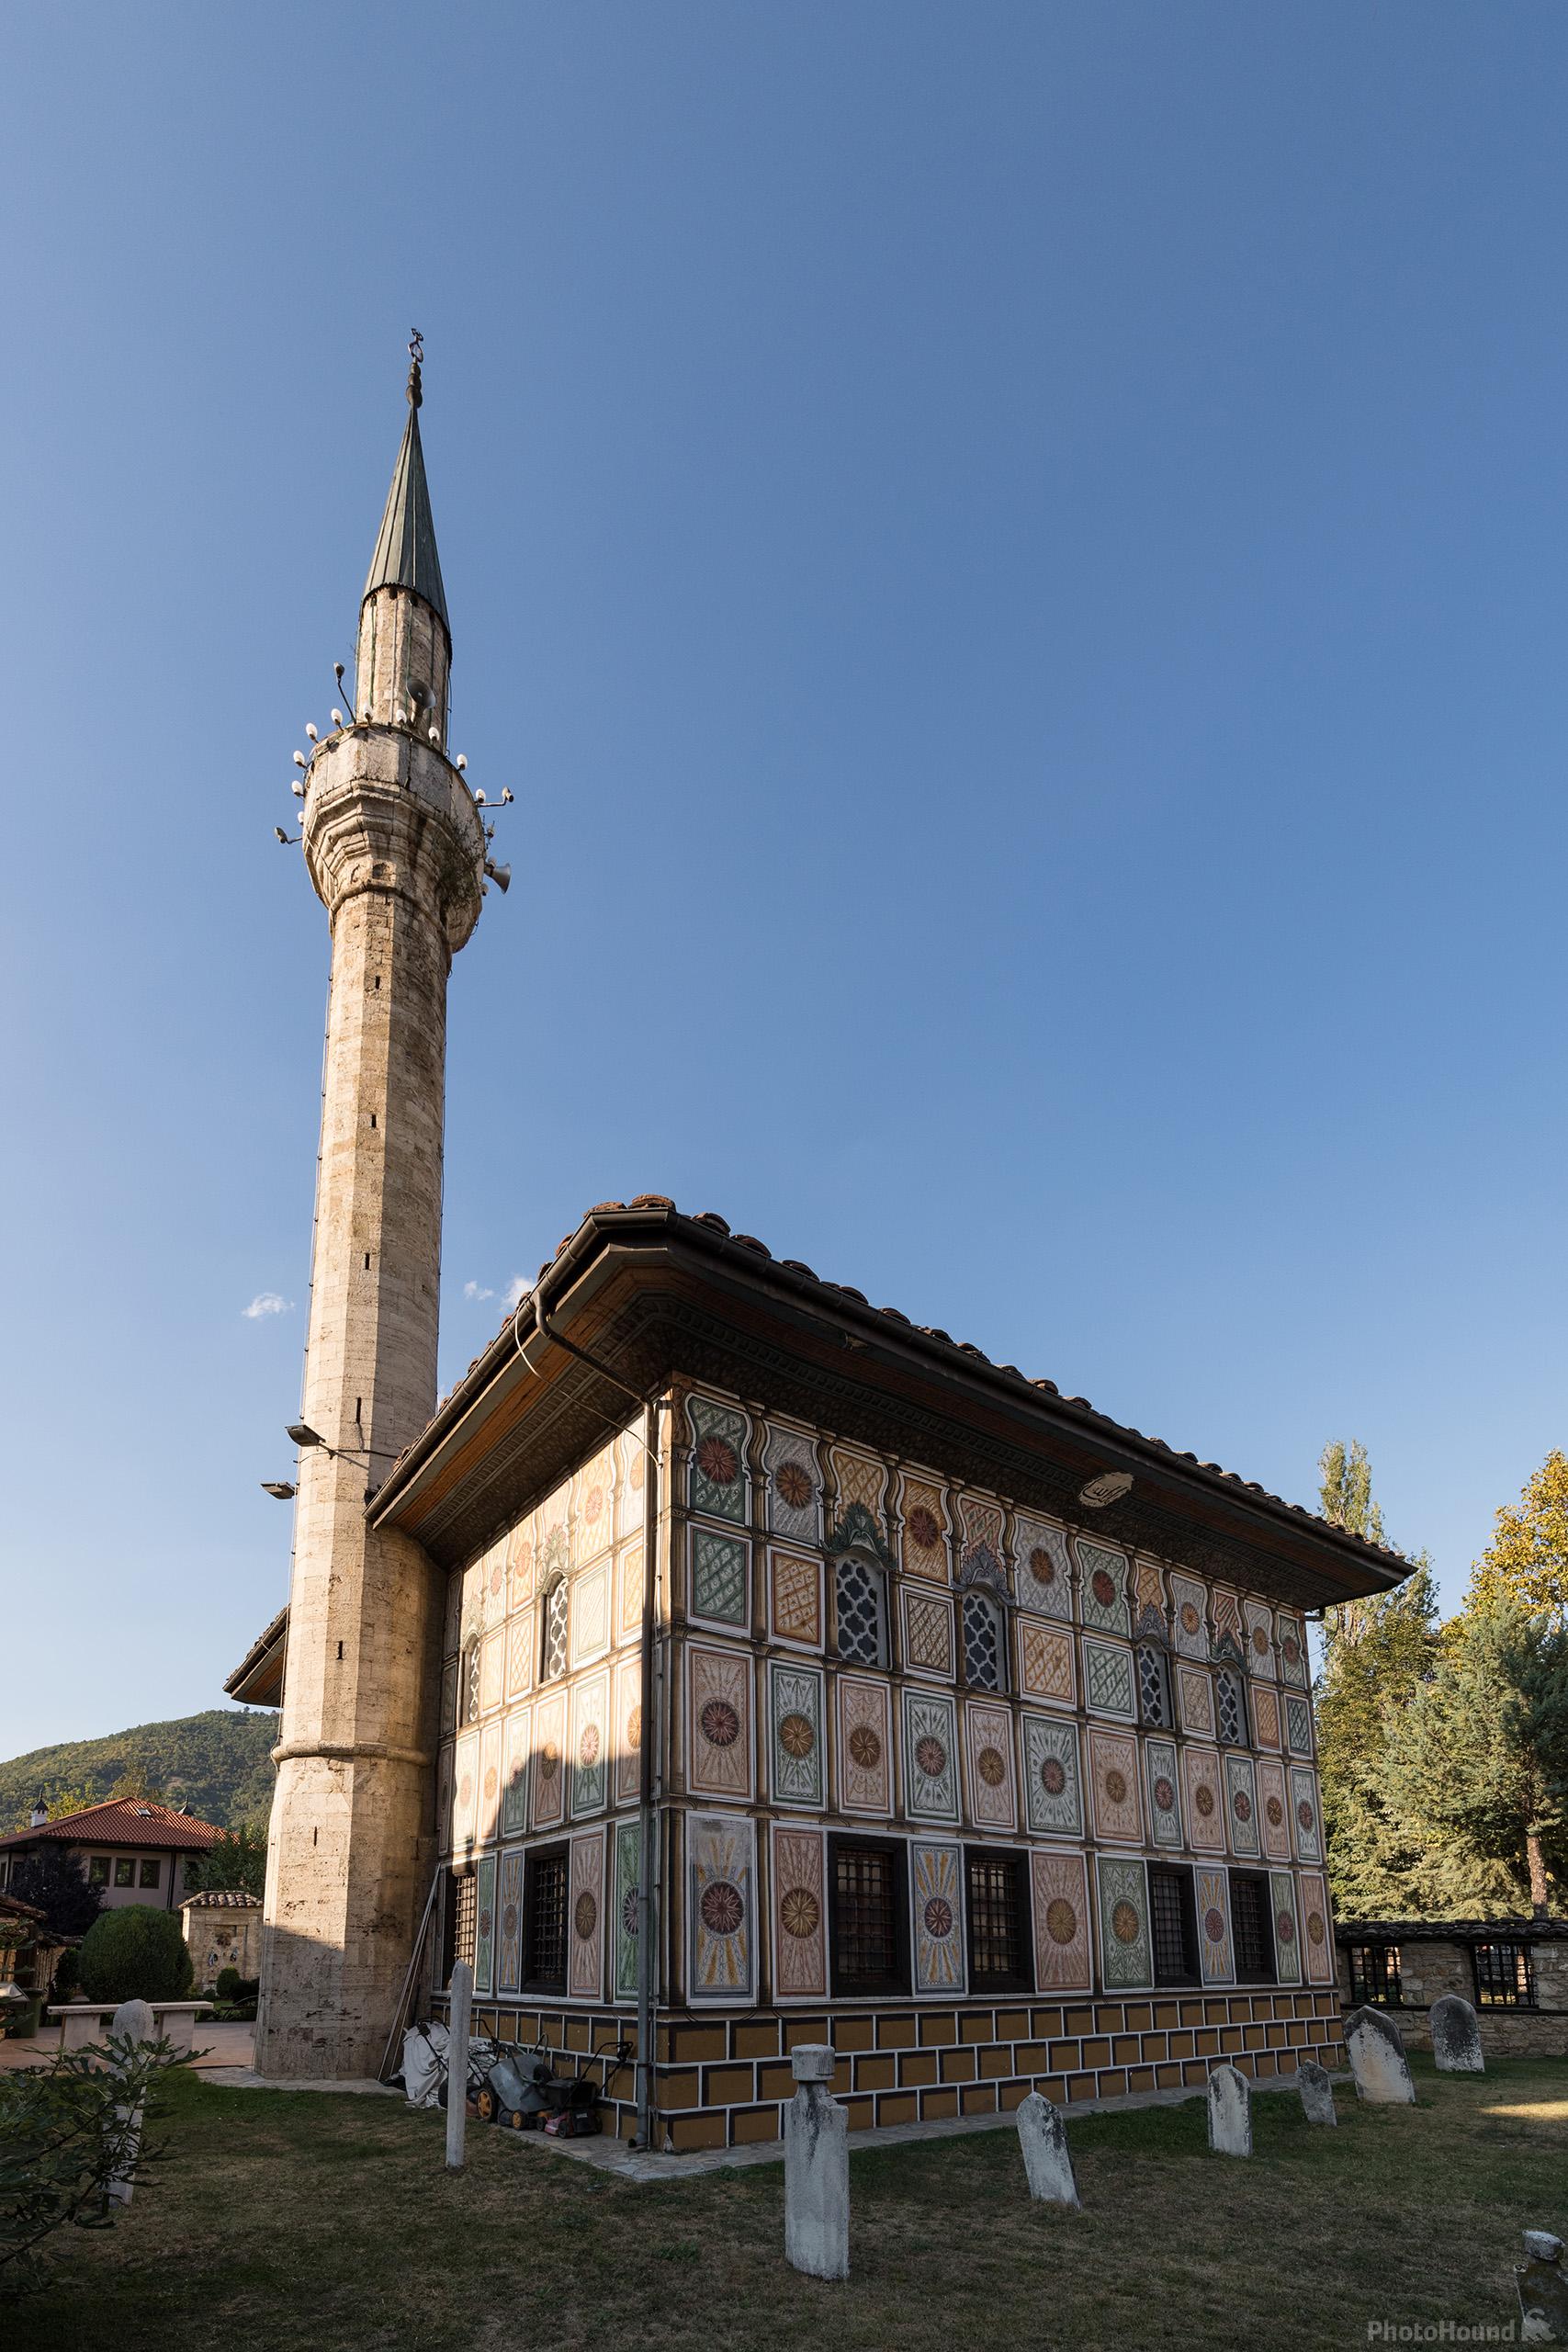 Image of Motley (Spotted) Mosque by Luka Esenko